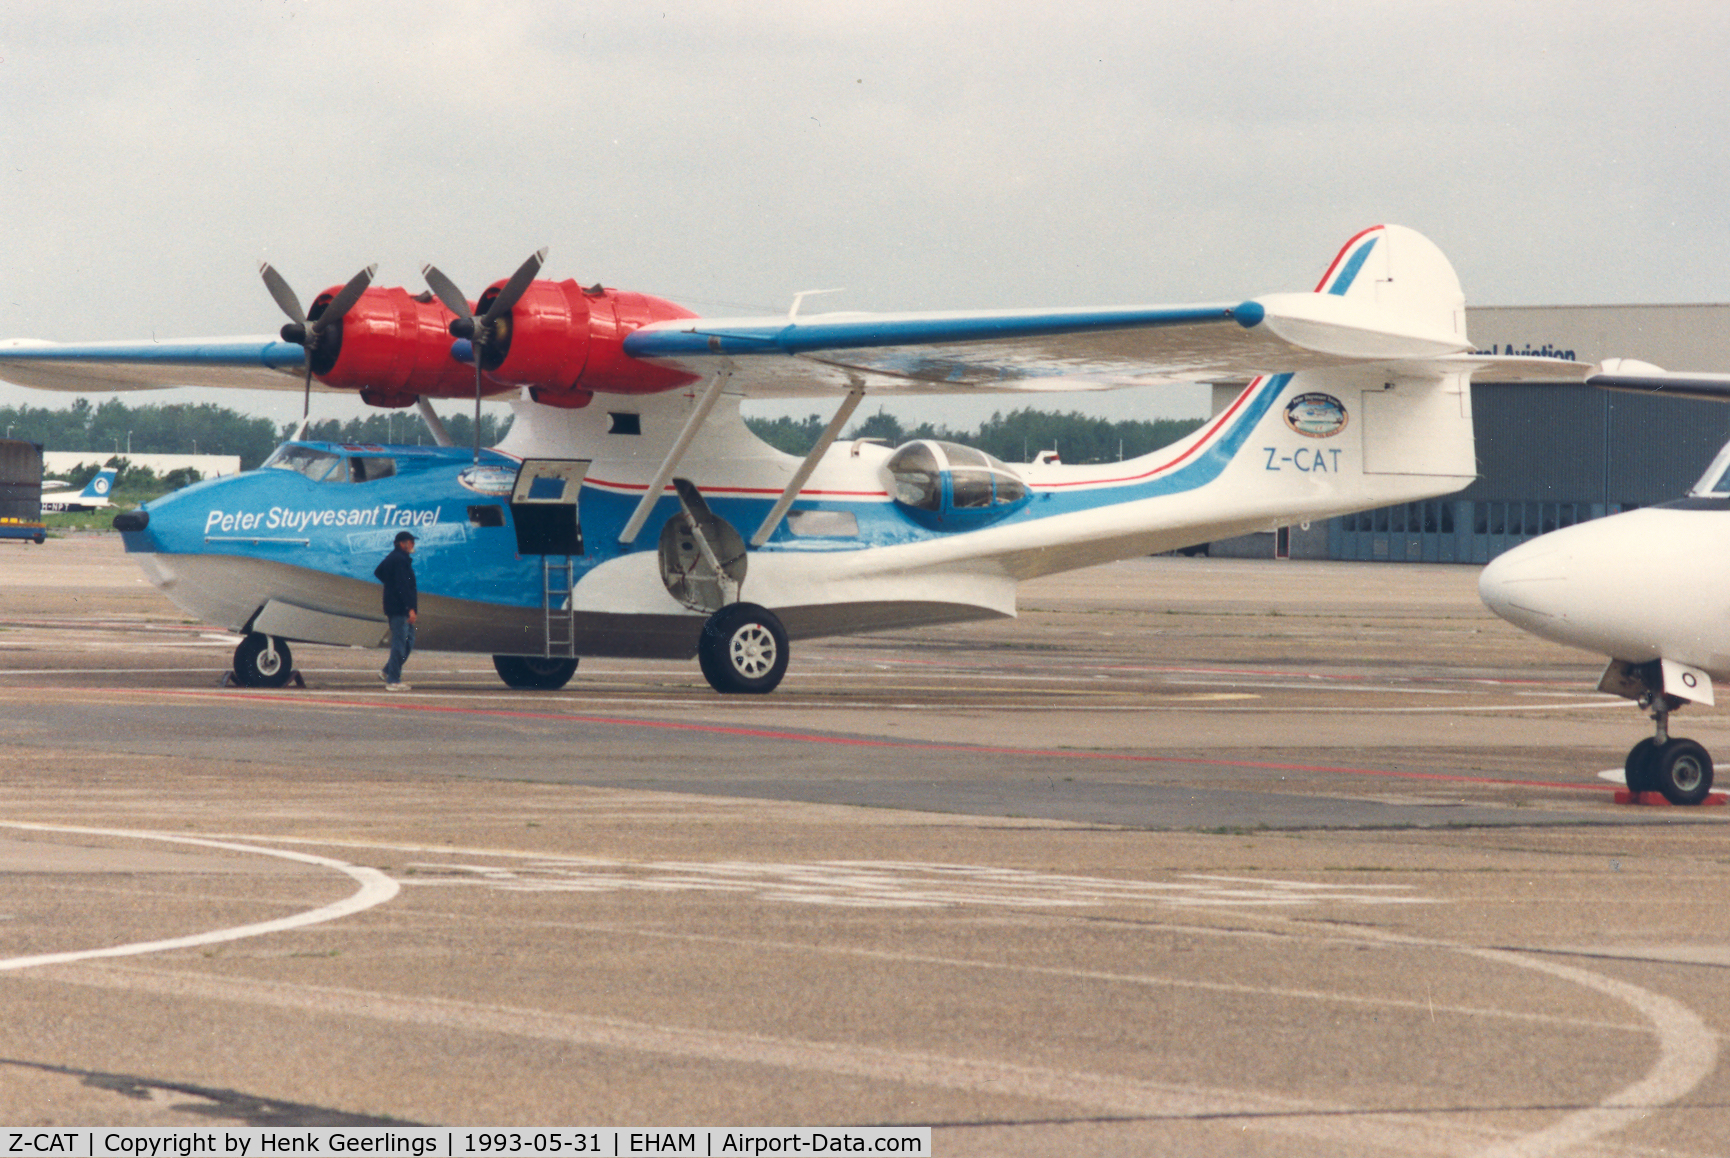 Z-CAT, Consolidated (Canadian Vickers) PBV-1A Canso C/N CV-357, Charter for Peter Stuyvesant Travel Odessey 1993 starting from Amsterdam - Schiphol.

Owner in 1993 was Catalina Safari